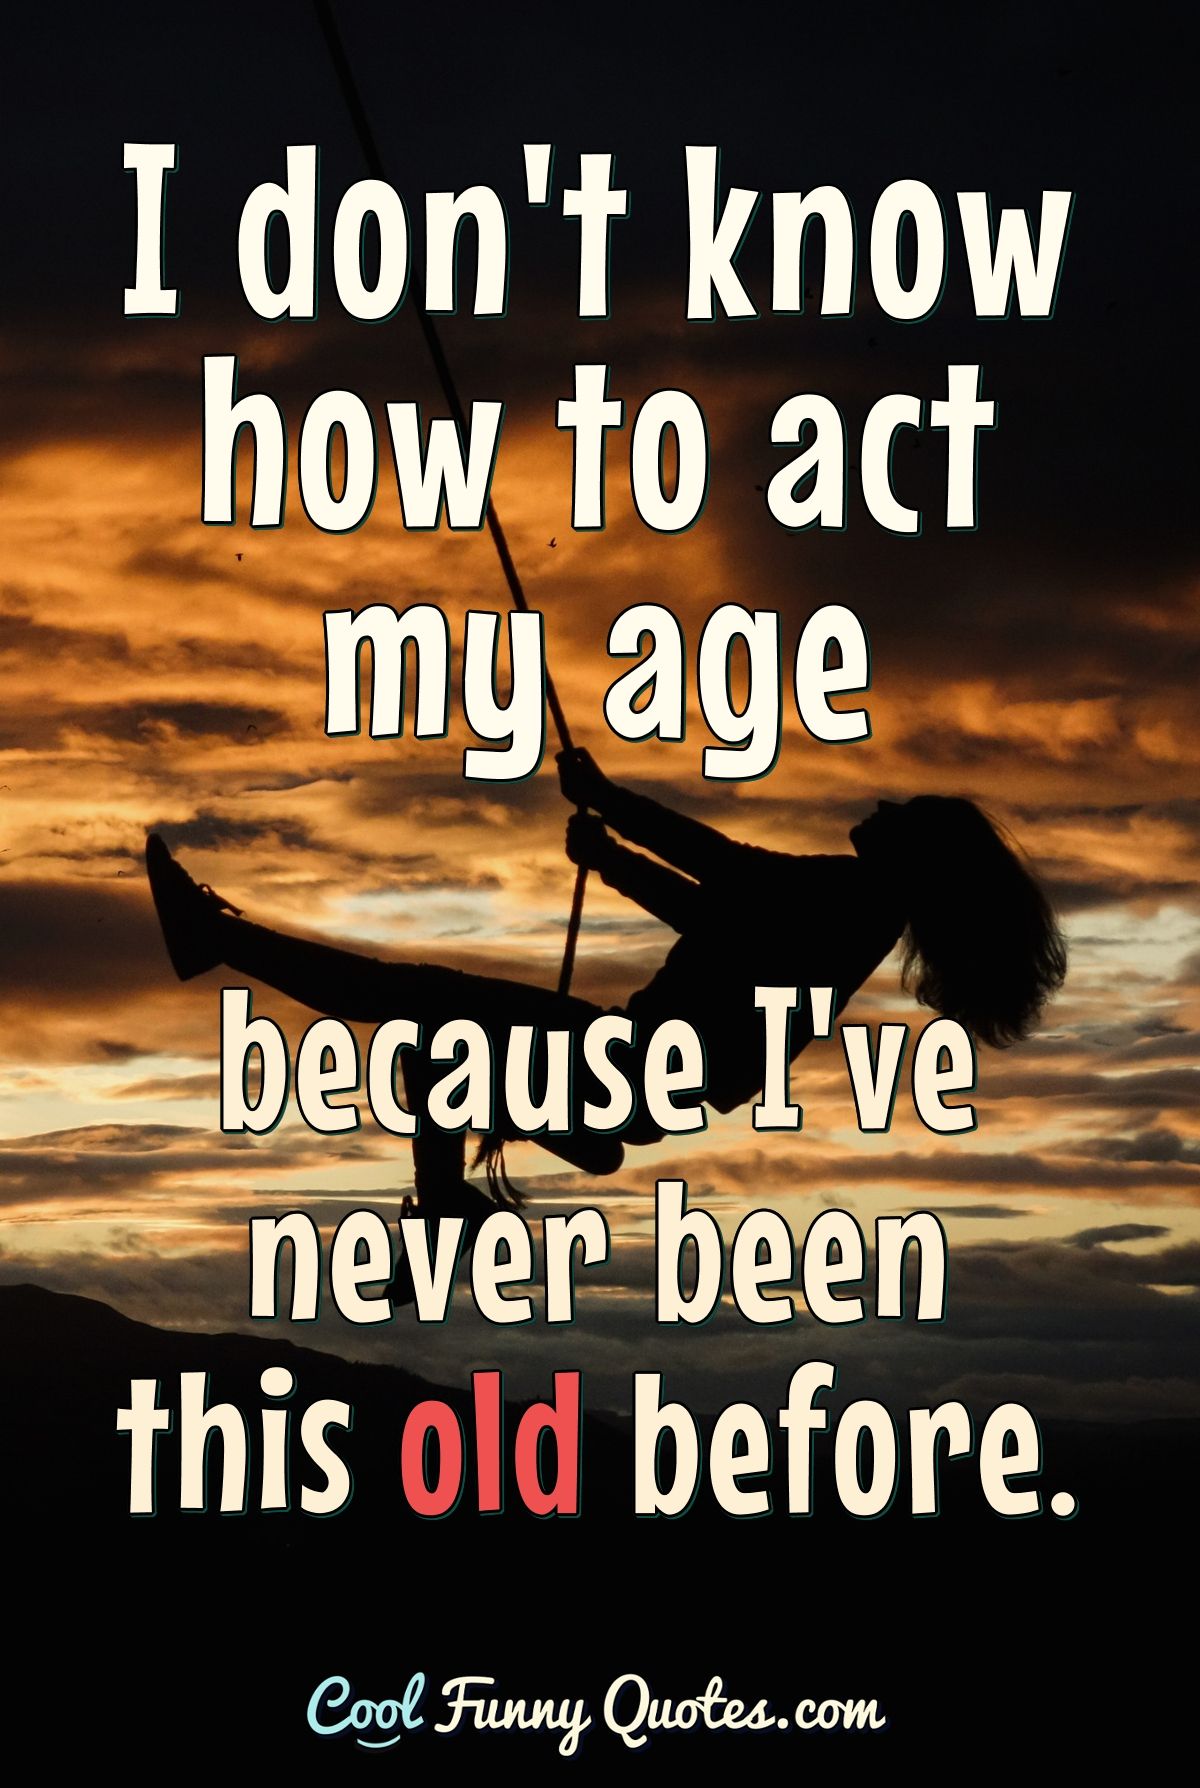 I don't know how to act my age because I've never been this old before.